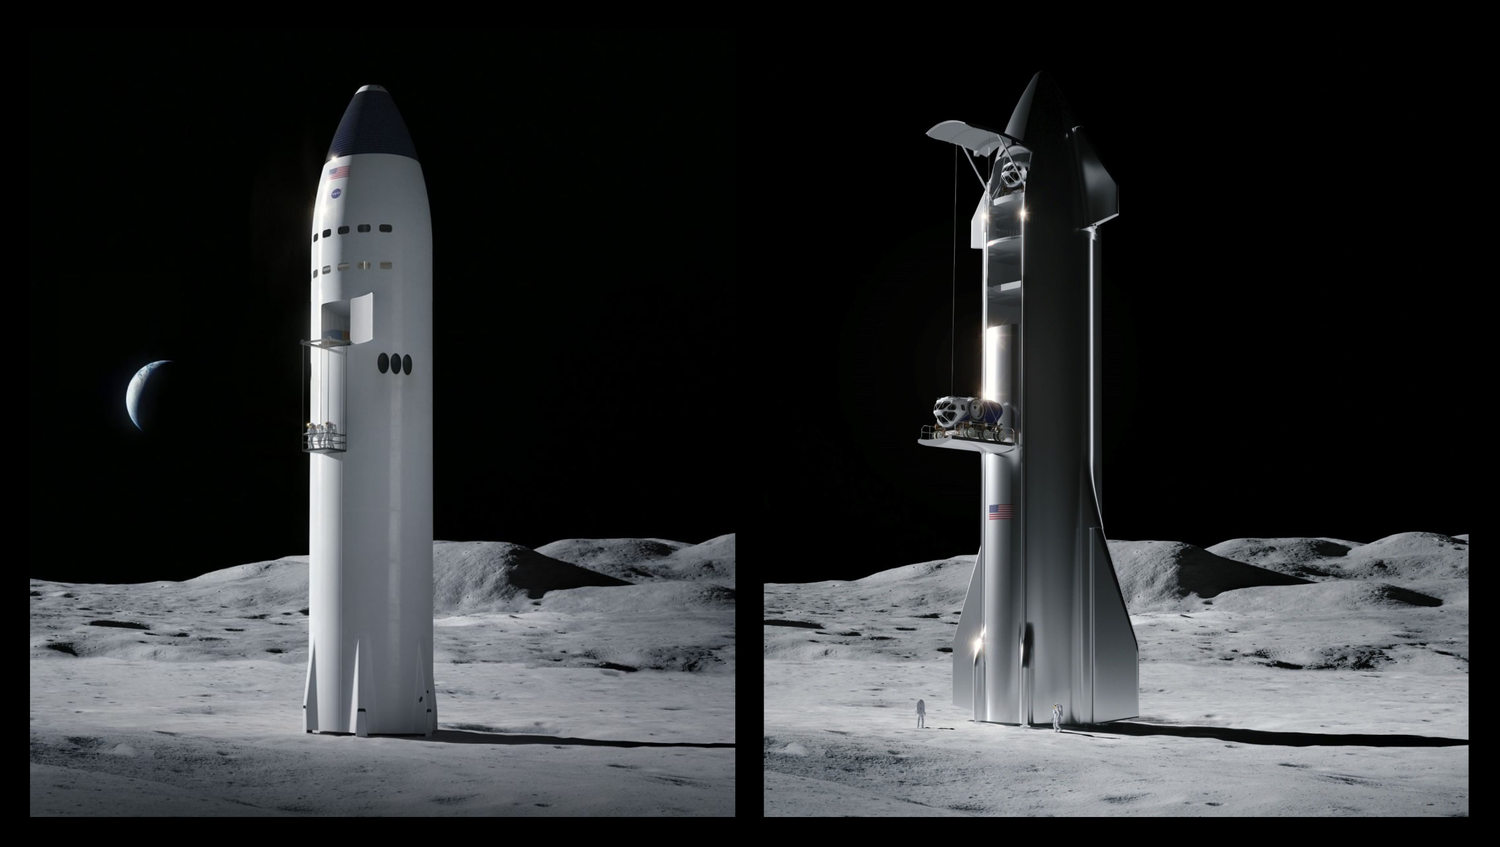 SpaceX will modify Starship's design for NASA Lunar Missions